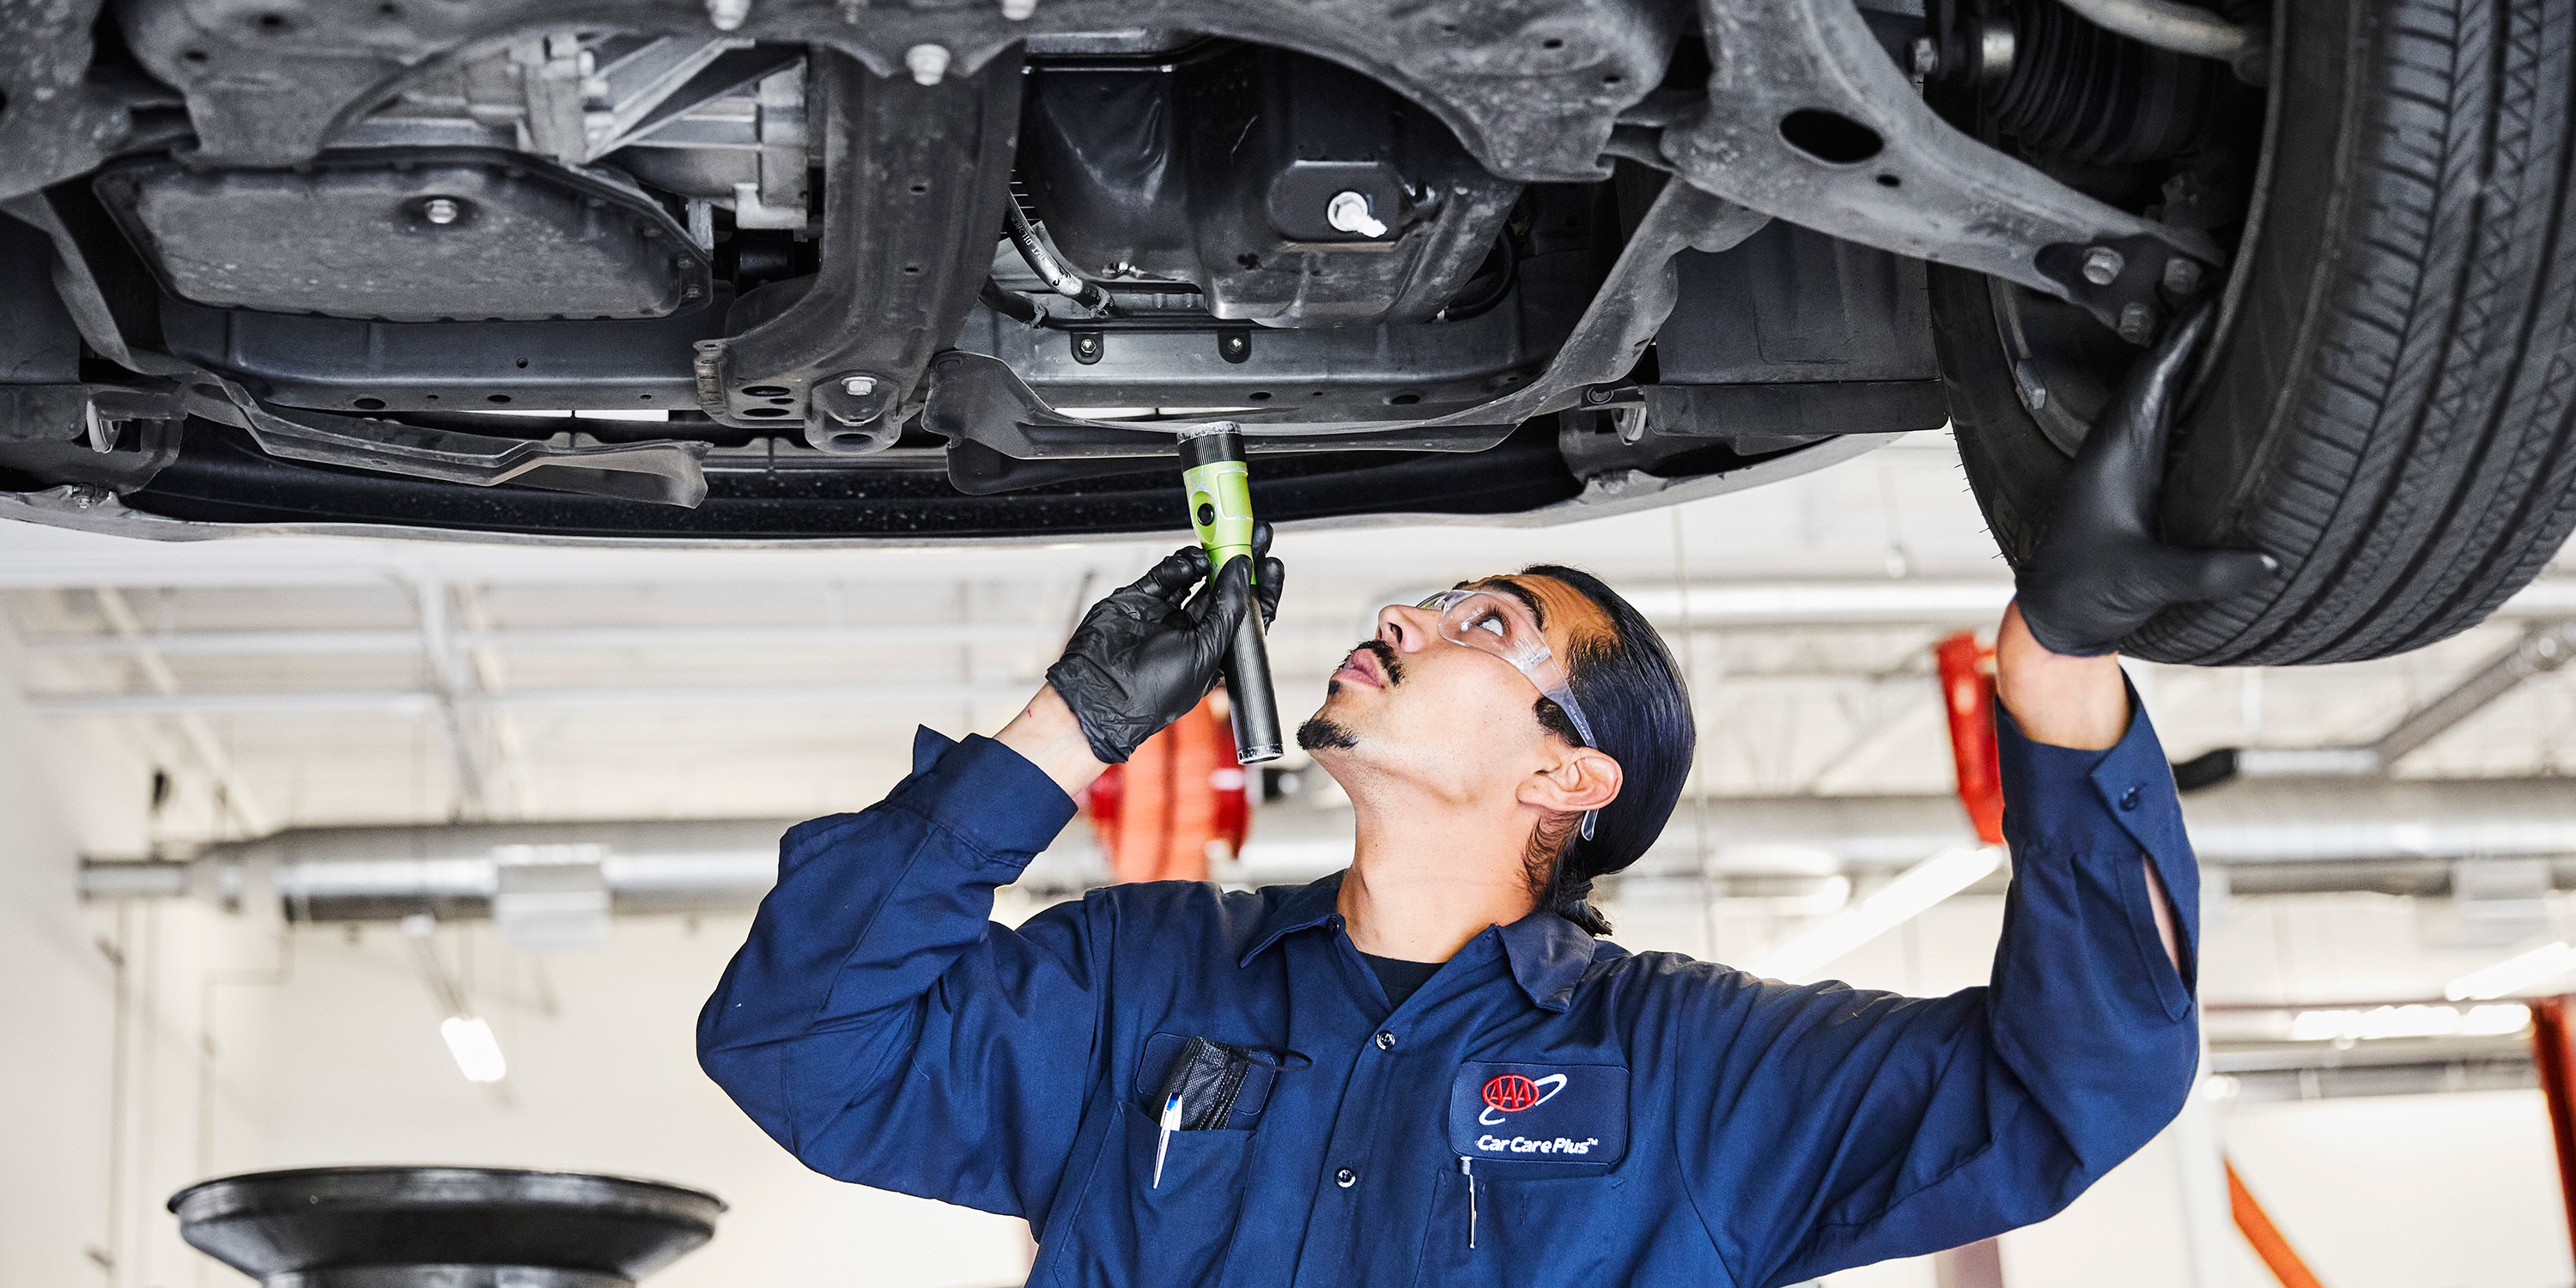 One-in-Three U.S. Drivers Cannot Pay for an Unexpected Car Repair Bill